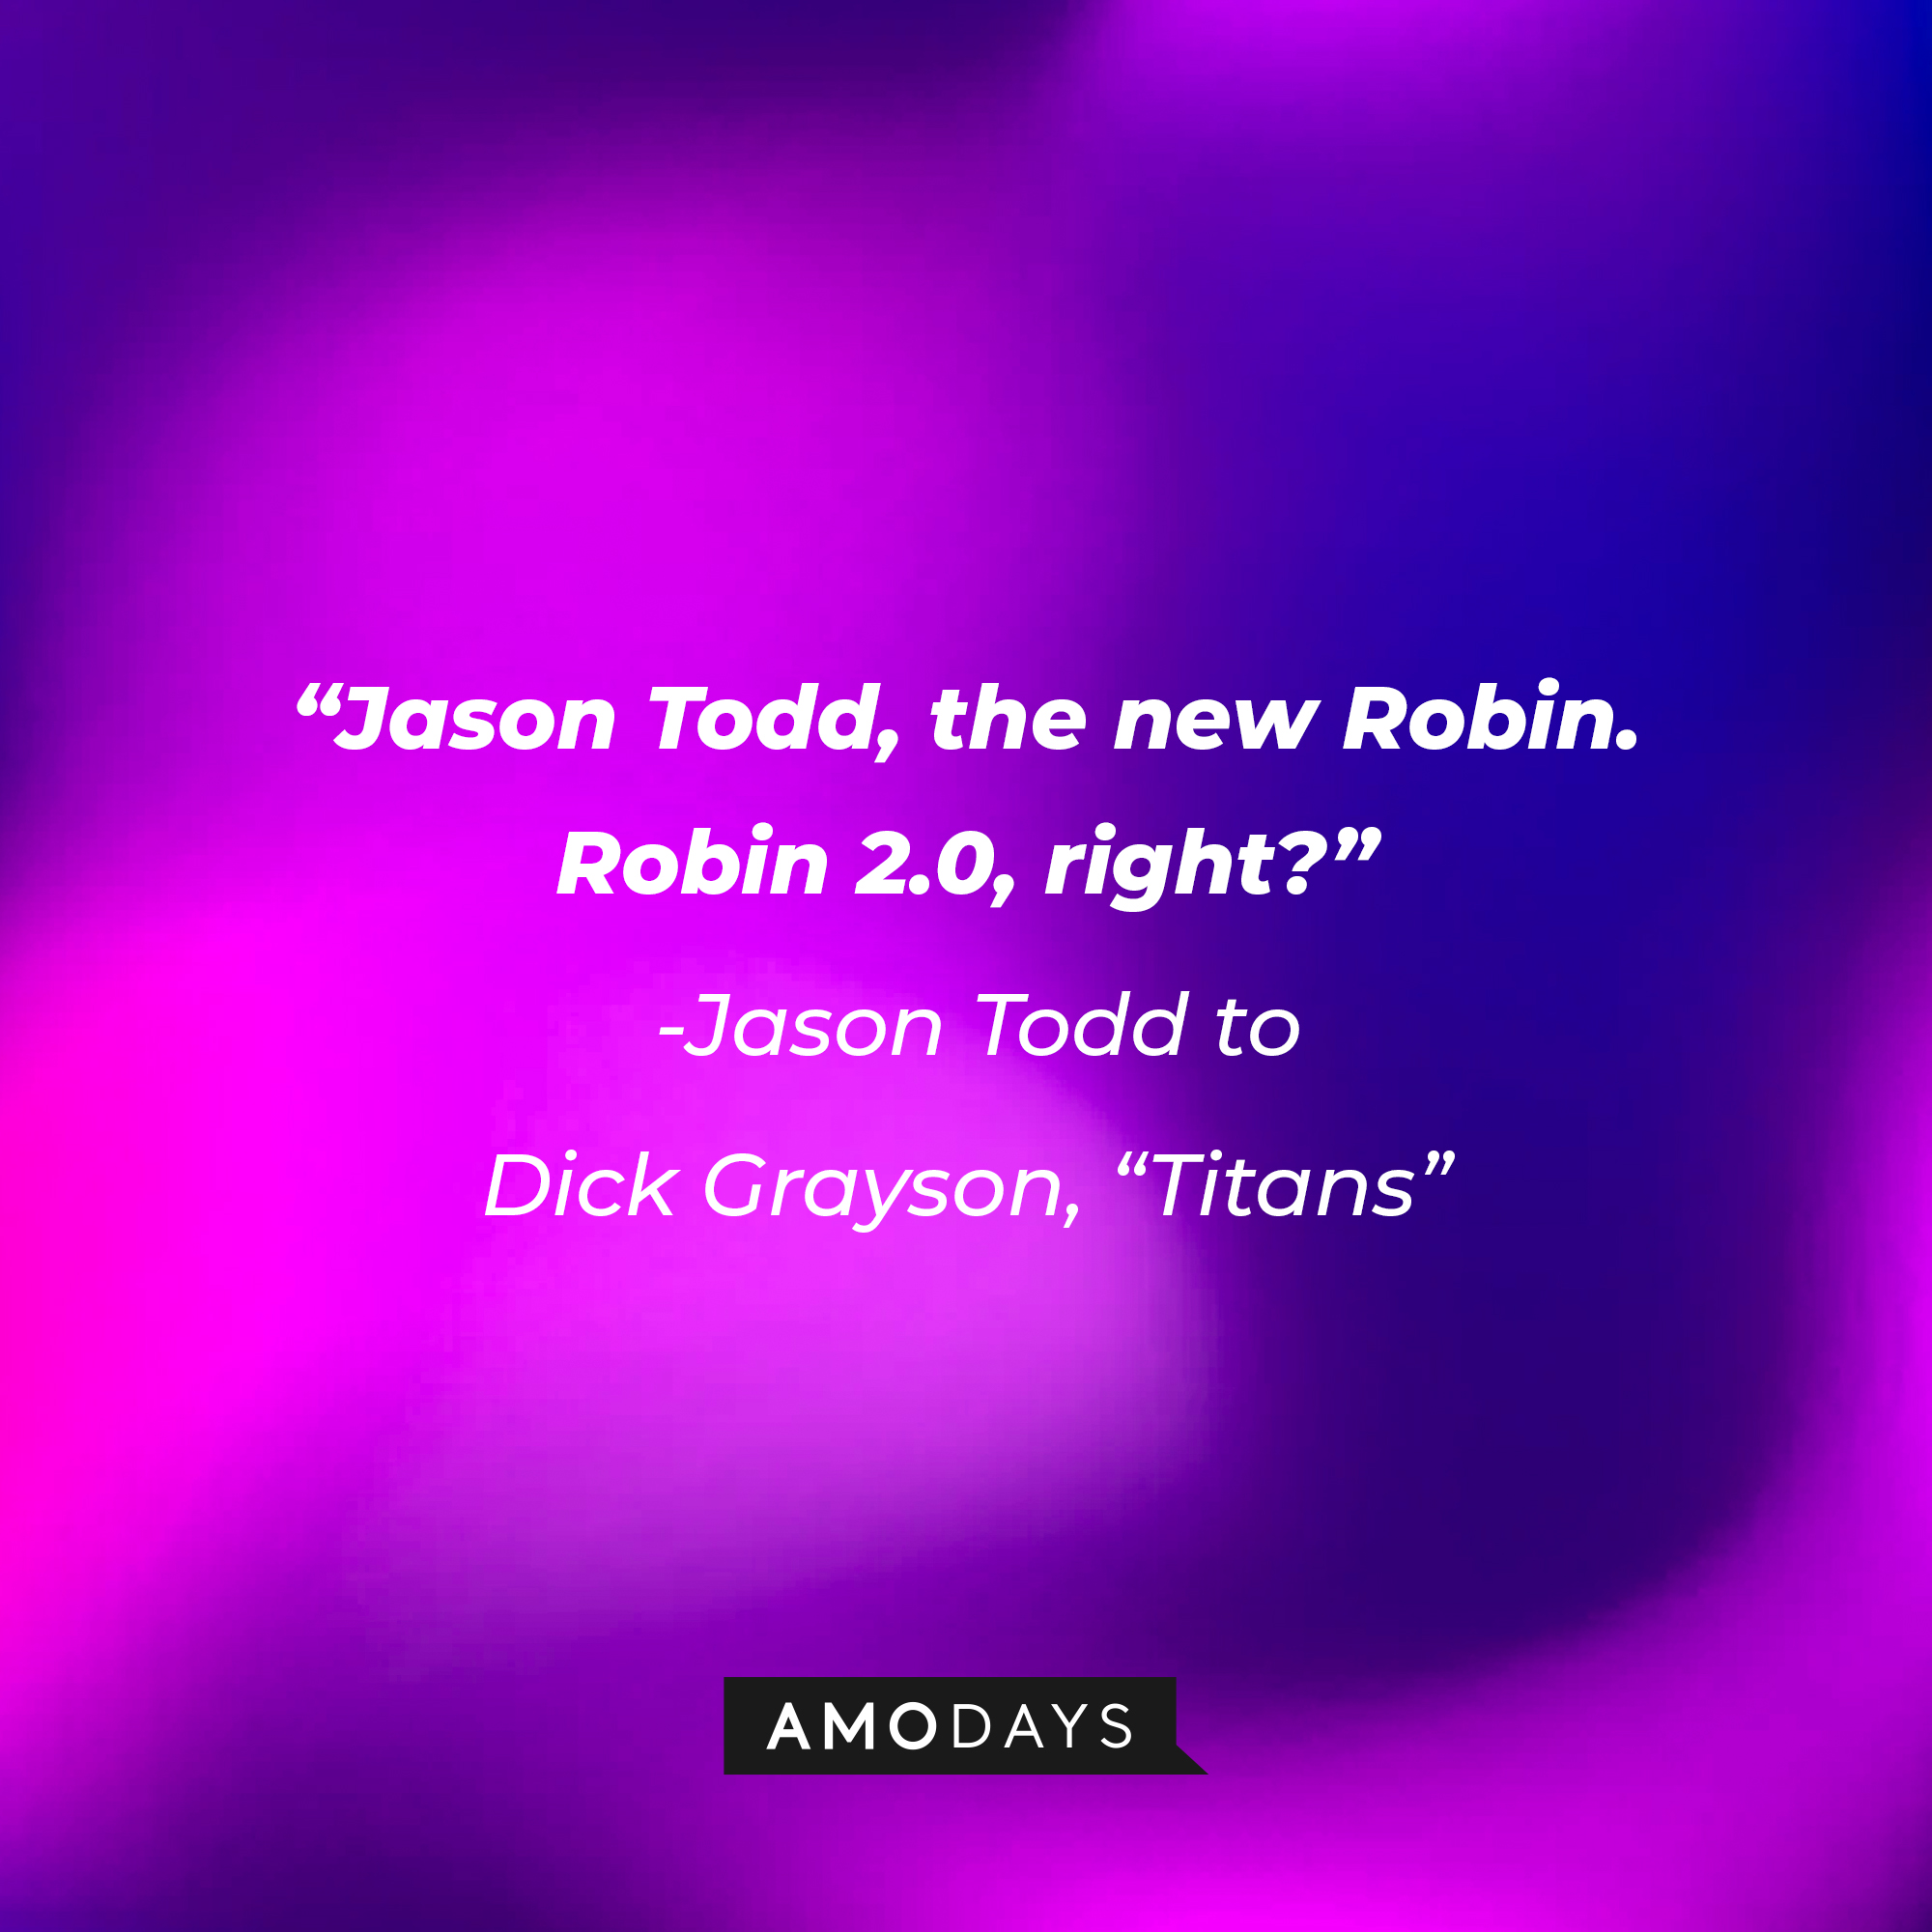 A "Titans" quote from Jason Todd to Dick Grayson: "Jason Todd, the new Robin. Robin 2.0, right?" | Source: AmoDays